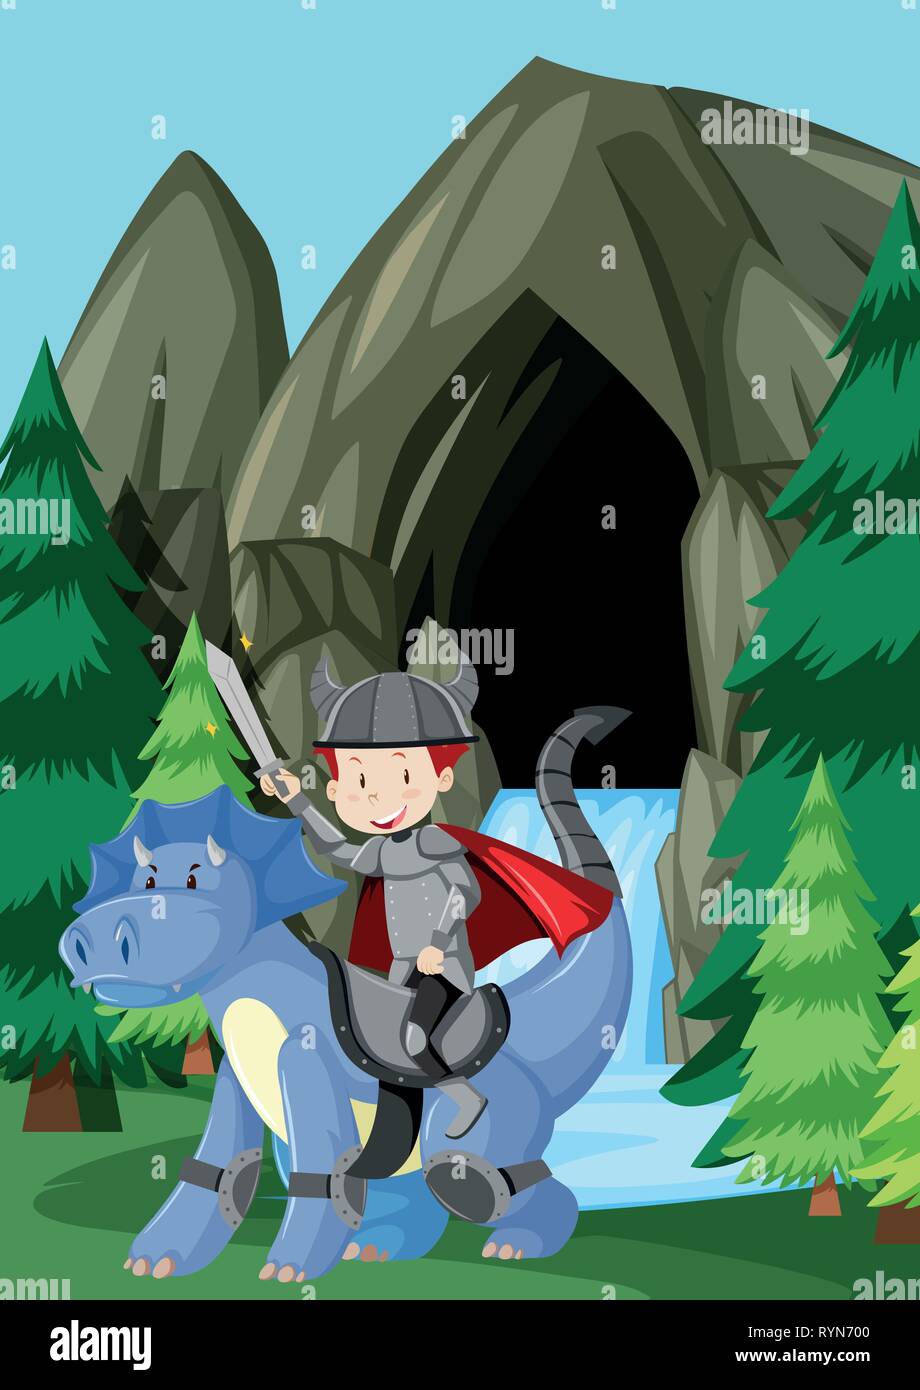 A prince riding dragon in nature illustration Stock Vector